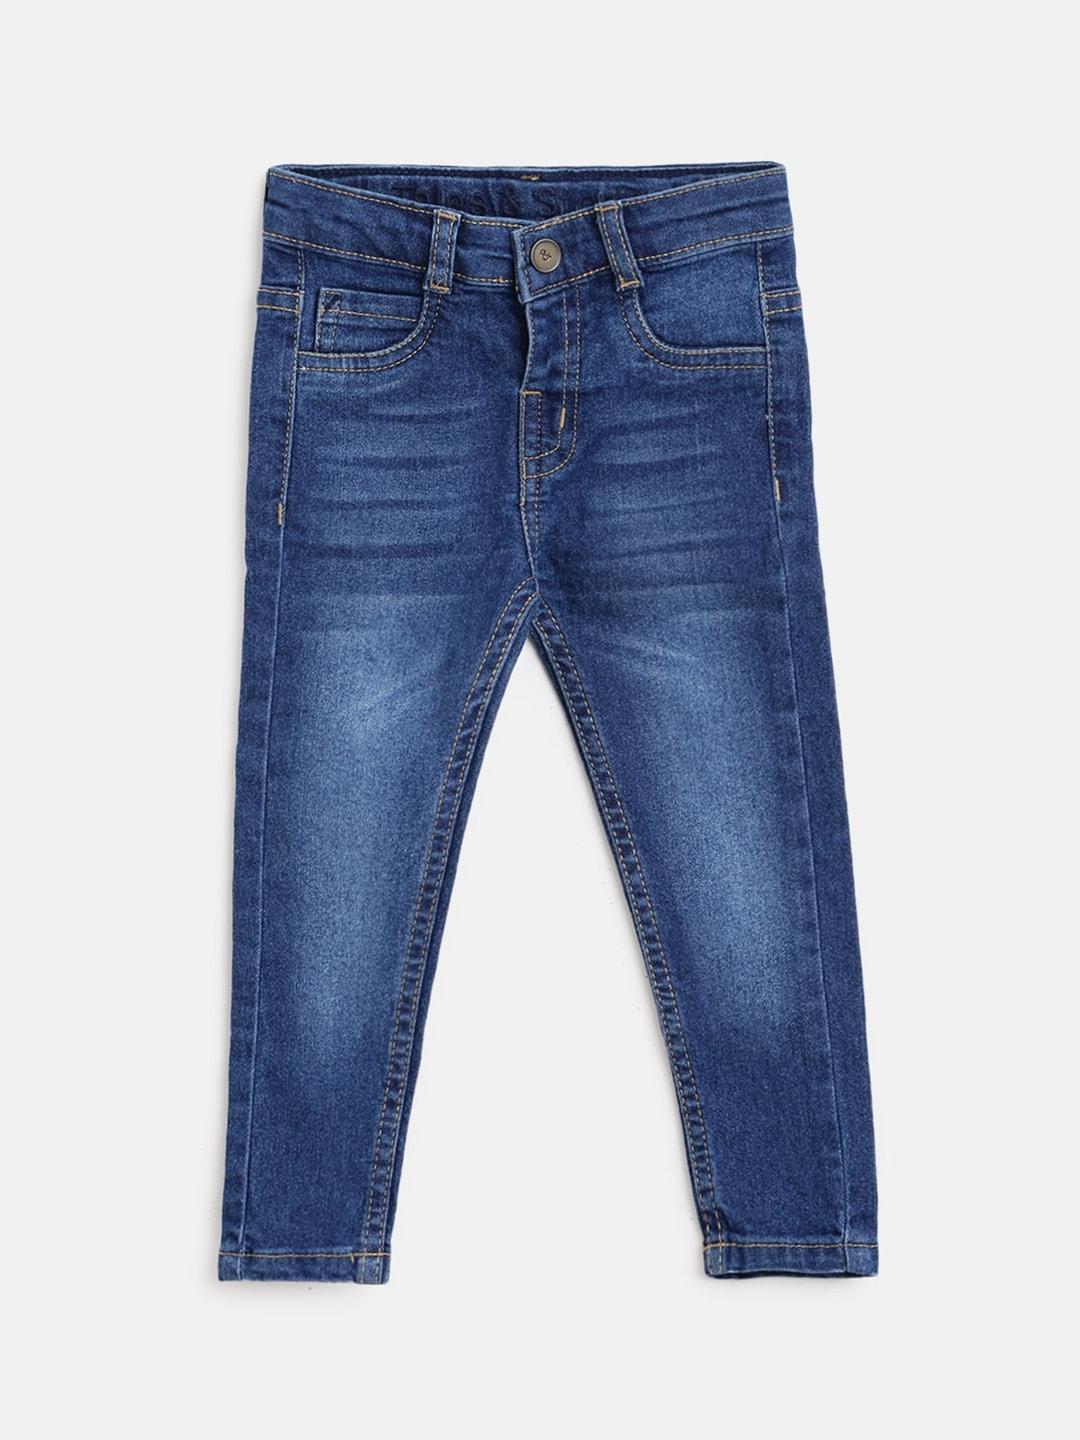 tales-&-stories-boys-blue-slim-fit-light-fade-stretchable-jeans